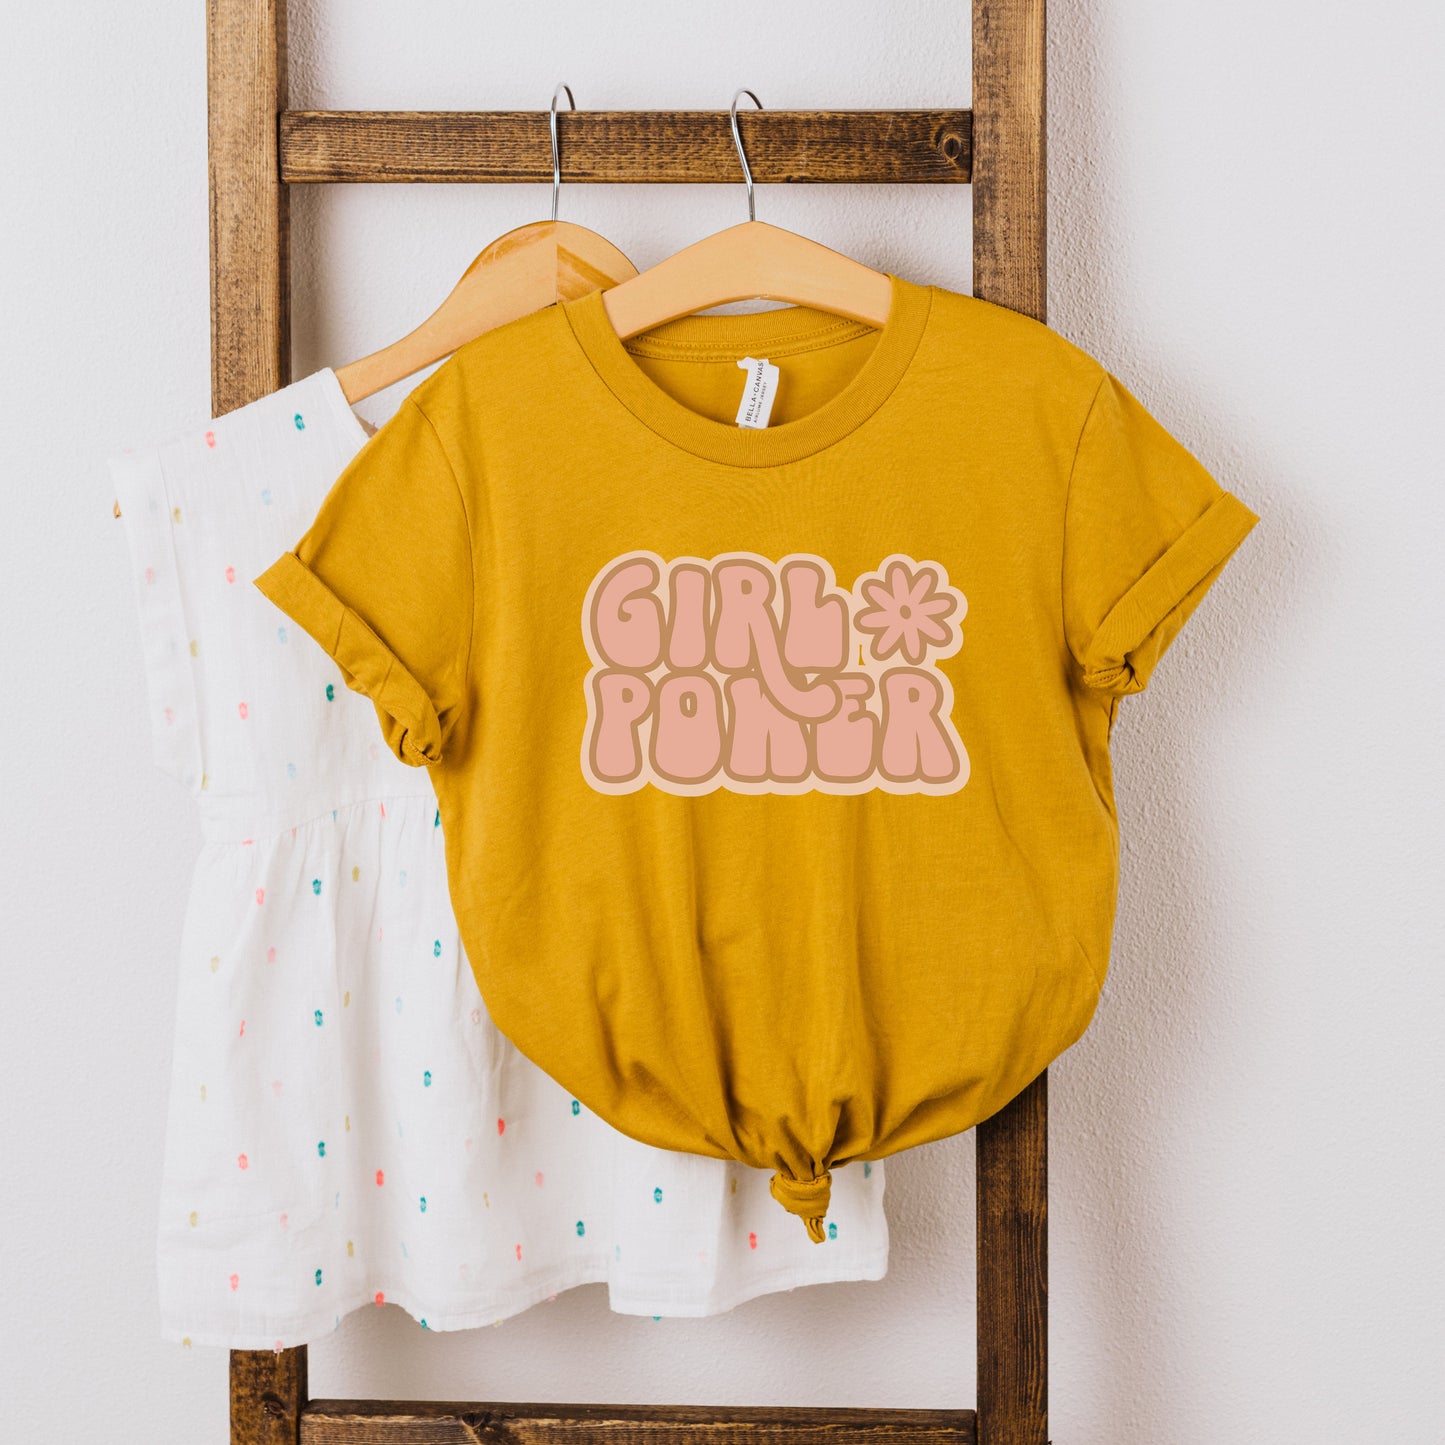 Retro Girl Power With Flower | Youth Short Sleeve Crew Neck